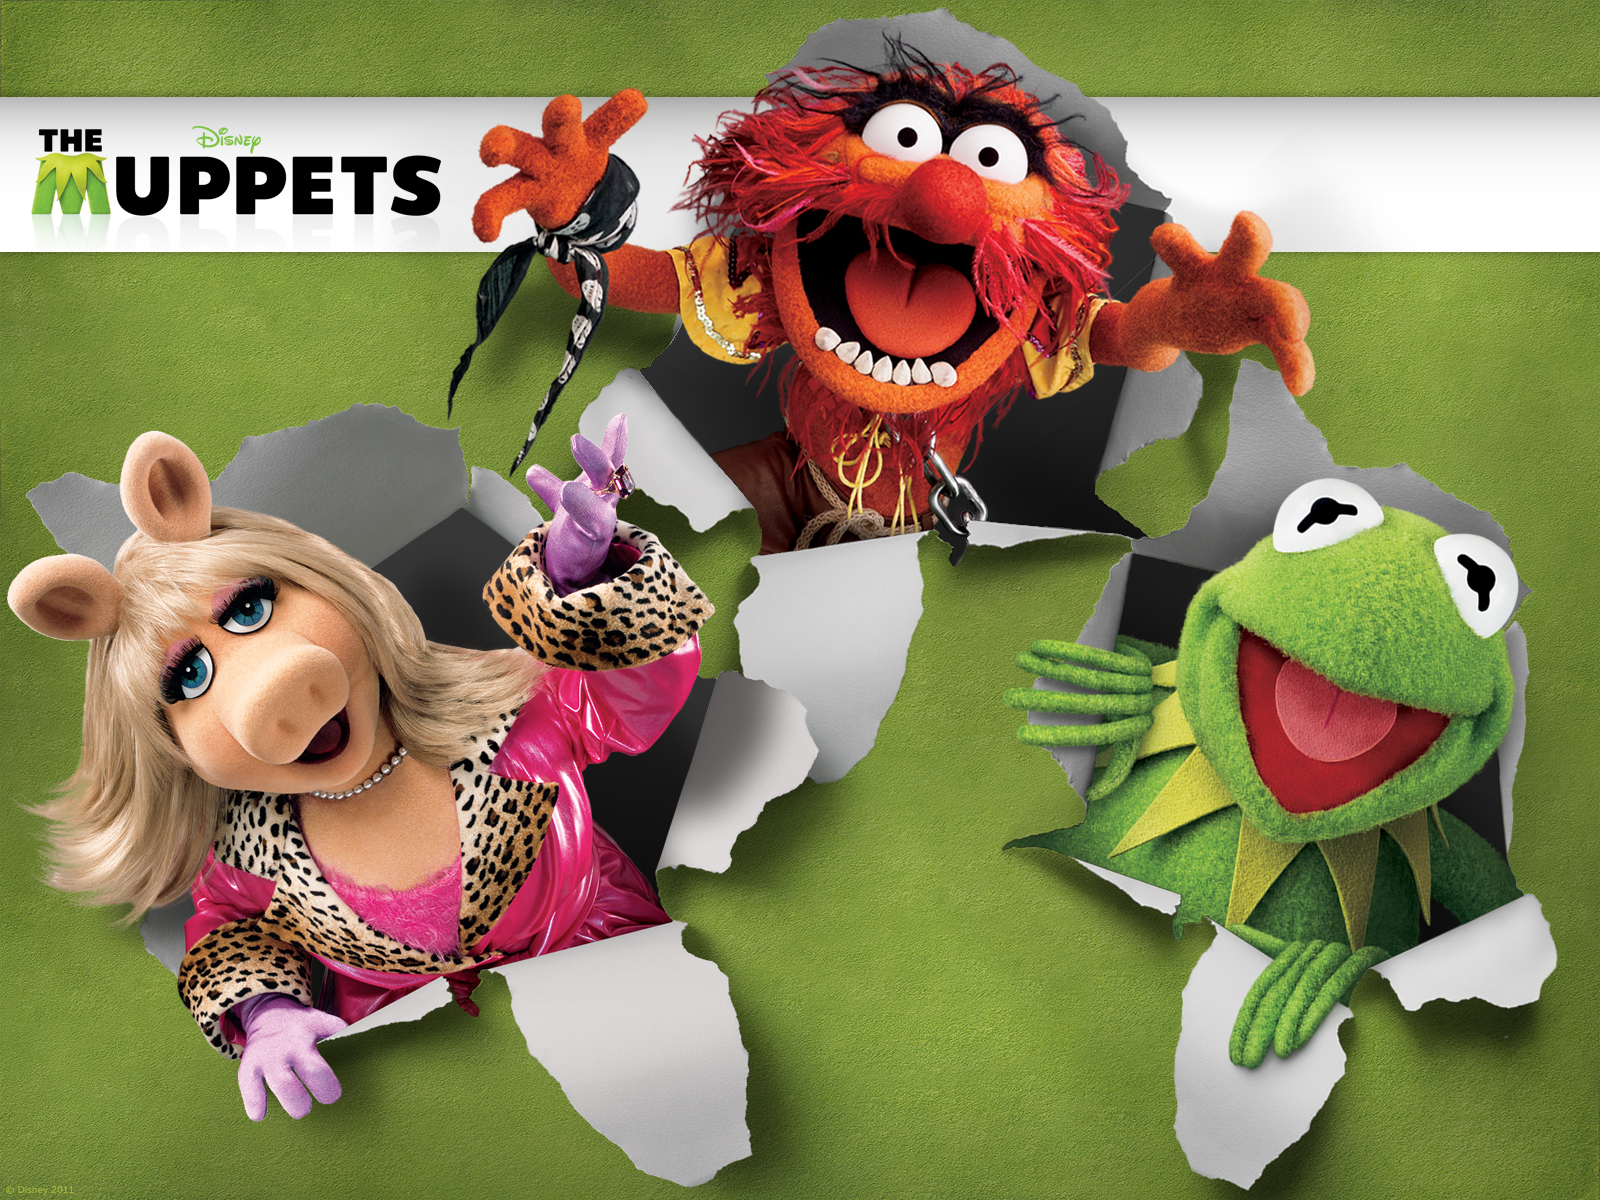 Gallery Photos of "Wallpapers Animal Muppets" .